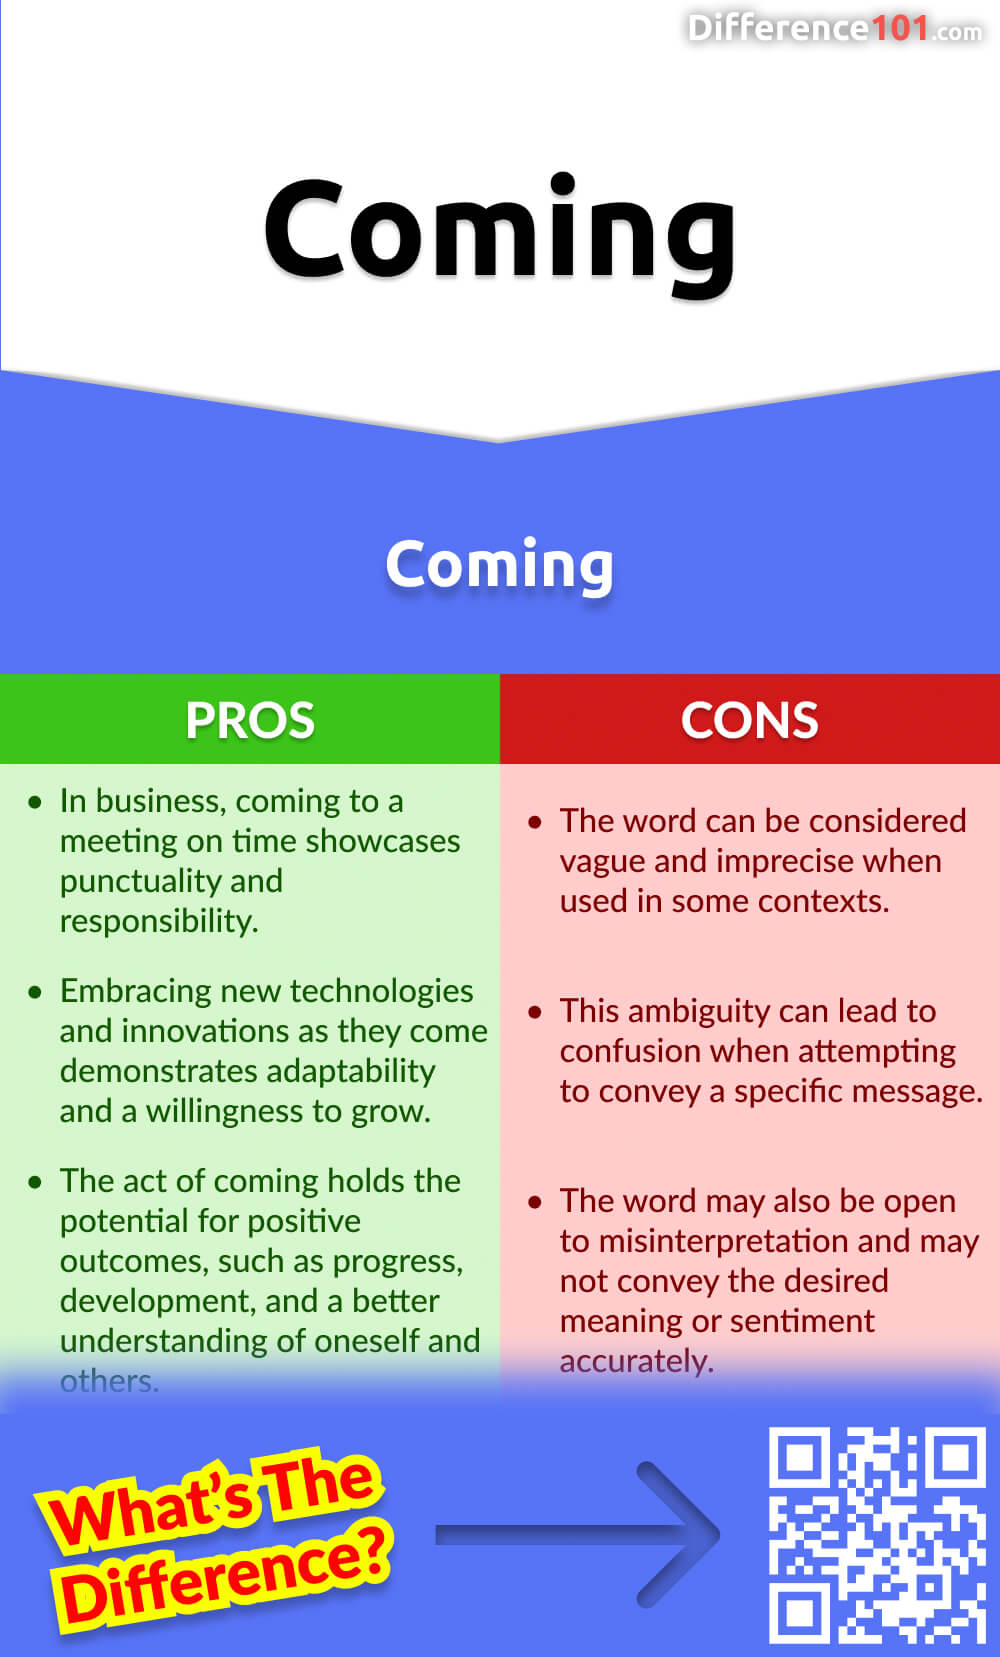 Coming Pros & Cons